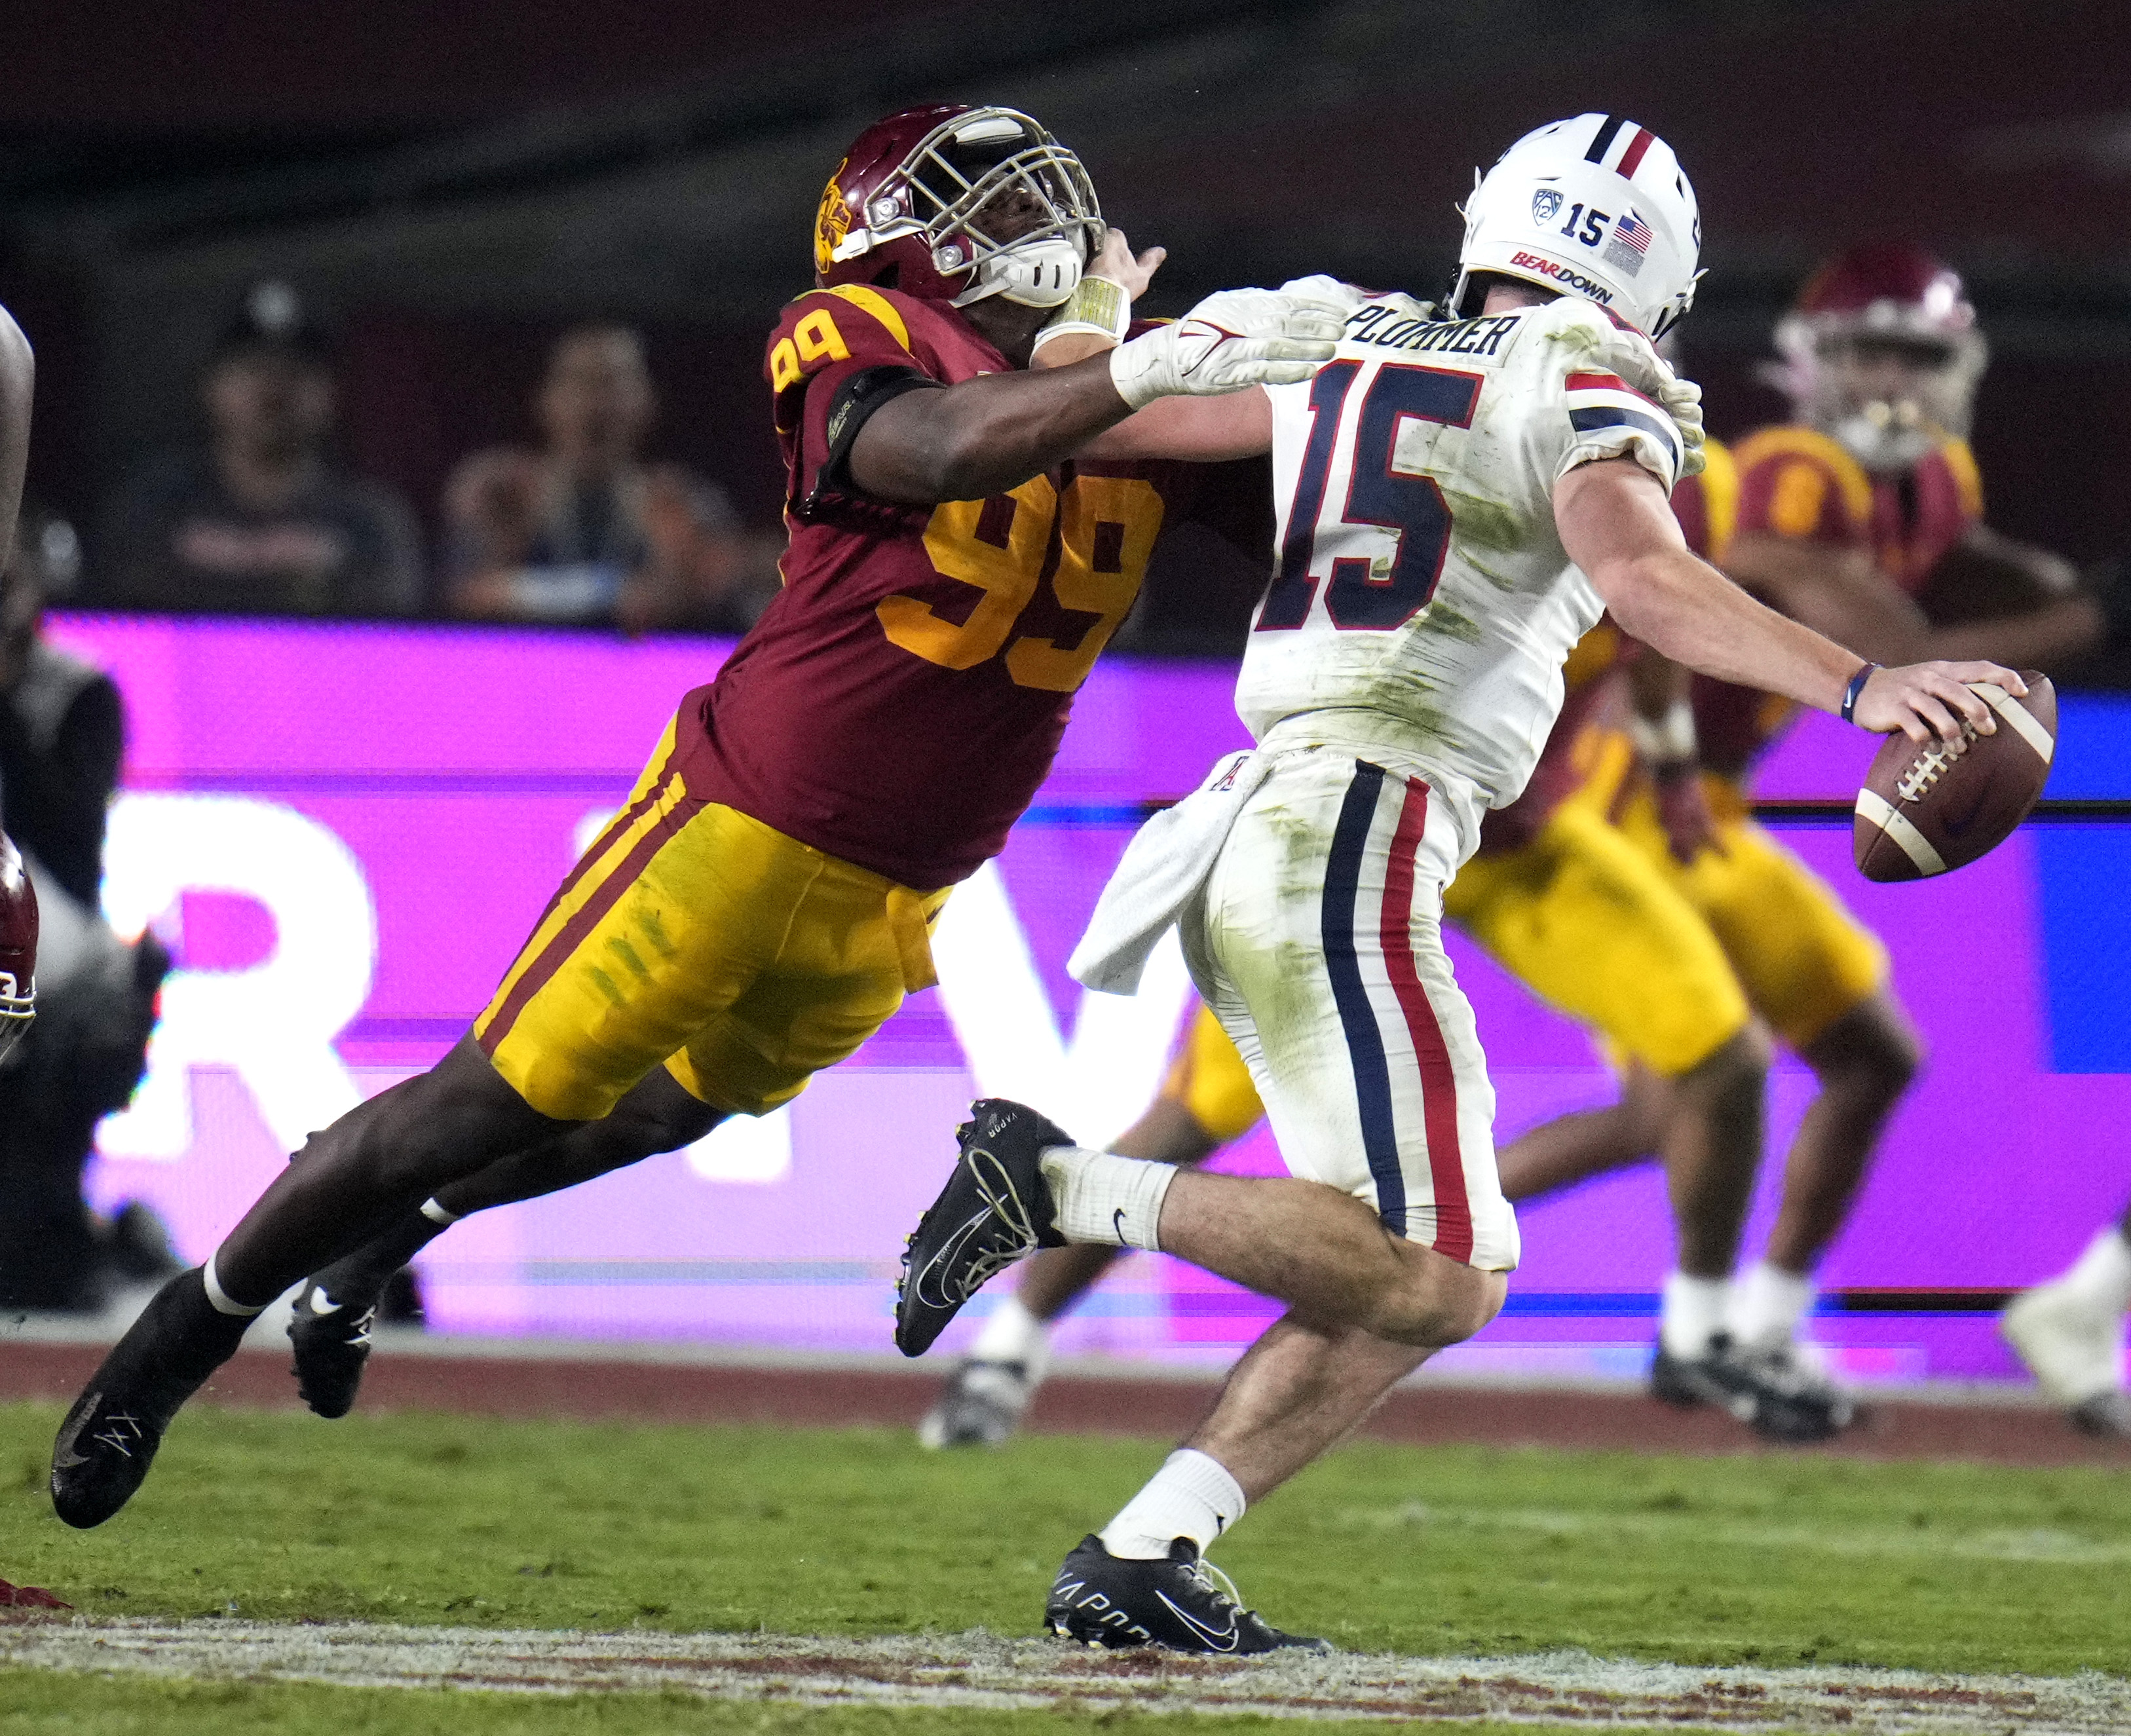 USC Trojans defeats the Arizona Wildcats 41-34 during a NCAA football game at the Los Angeles Memorial Coliseum in Los Angeles.